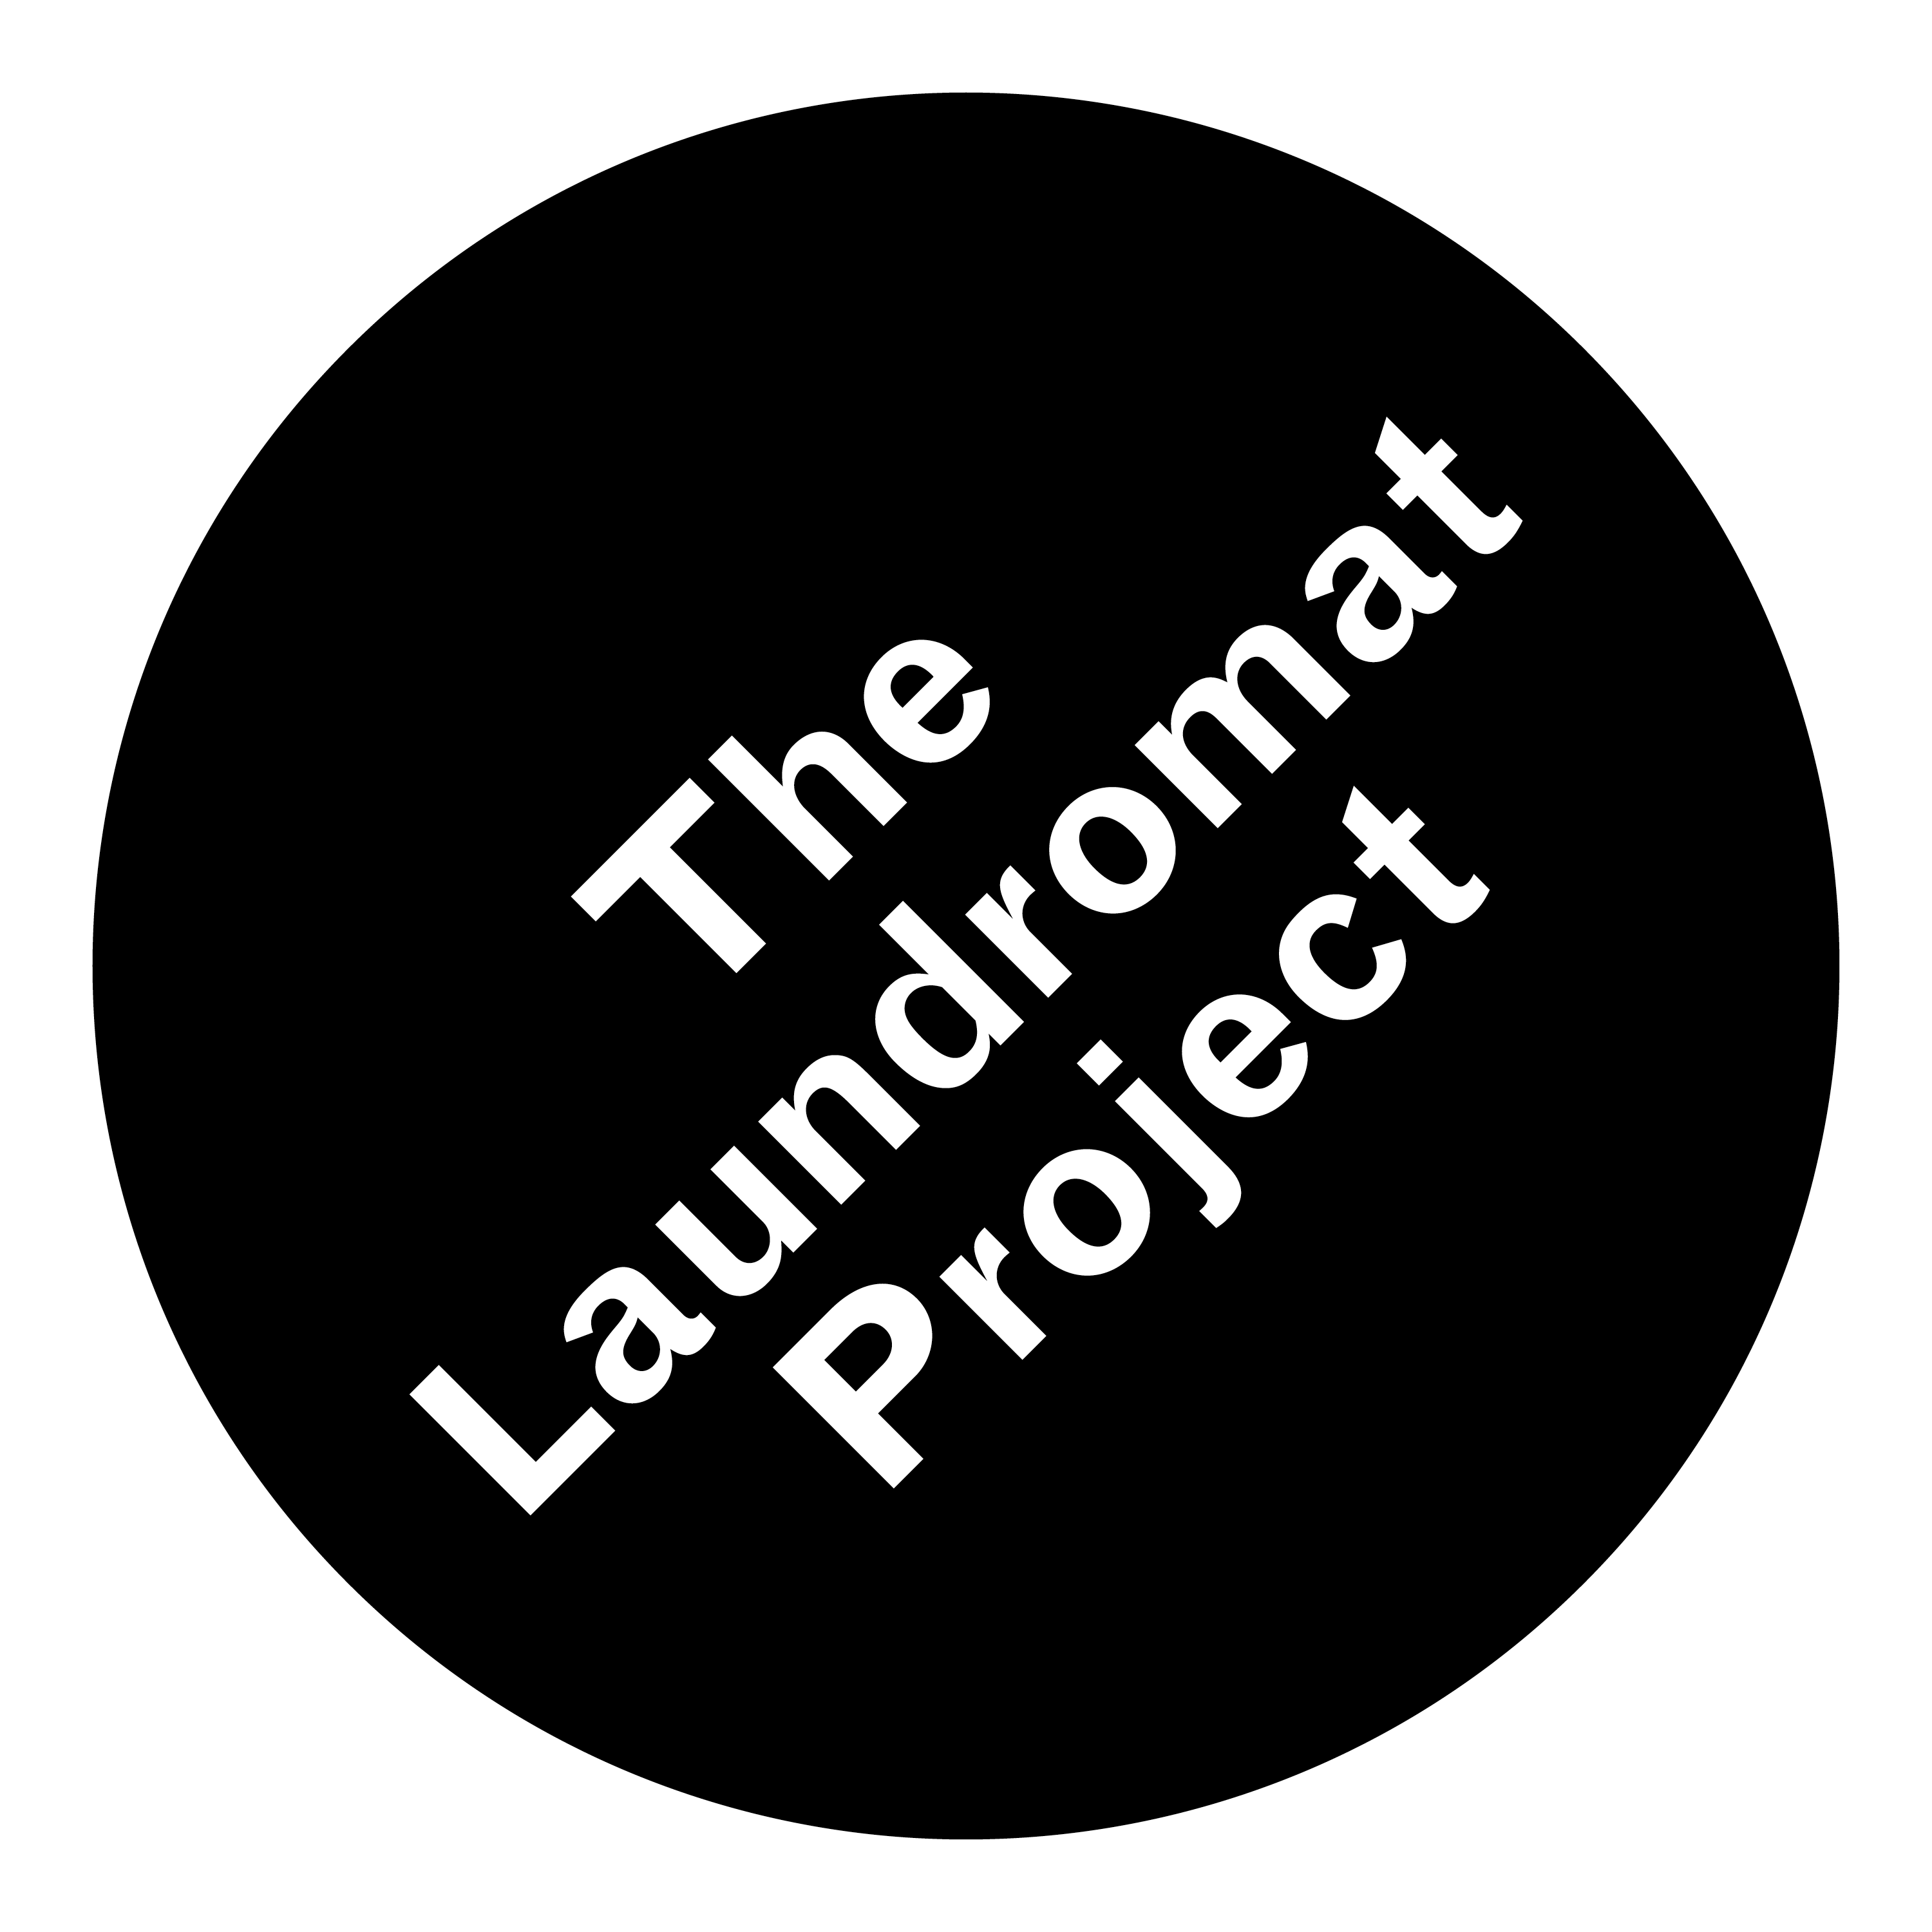 Up Close with Arts Entrepreneurs: The Laundromat Project